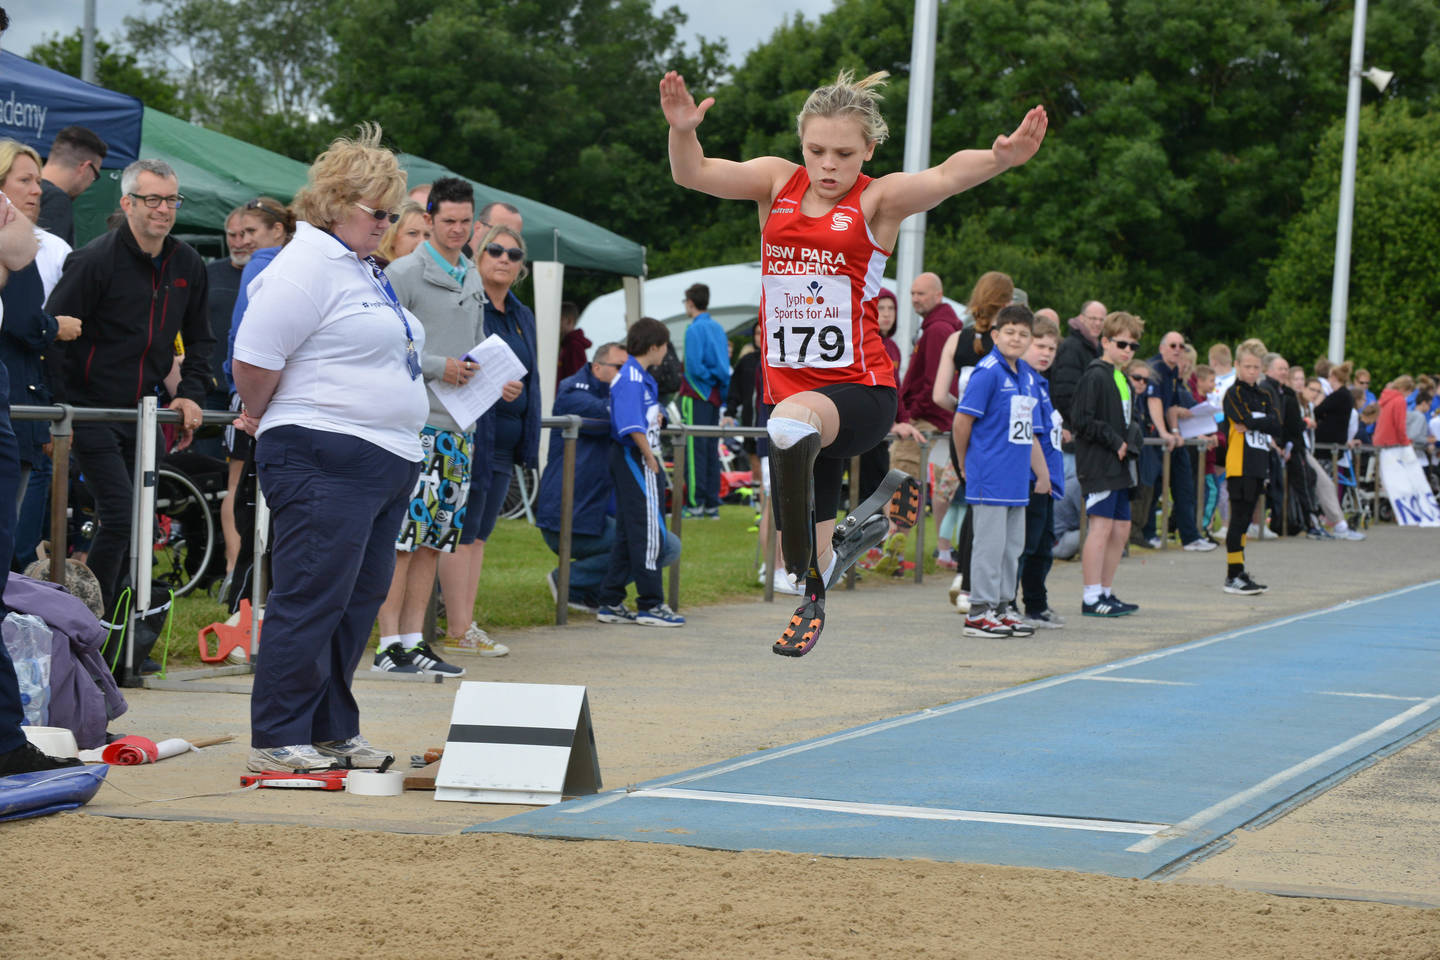 Welsh athlete takes part in the long jump